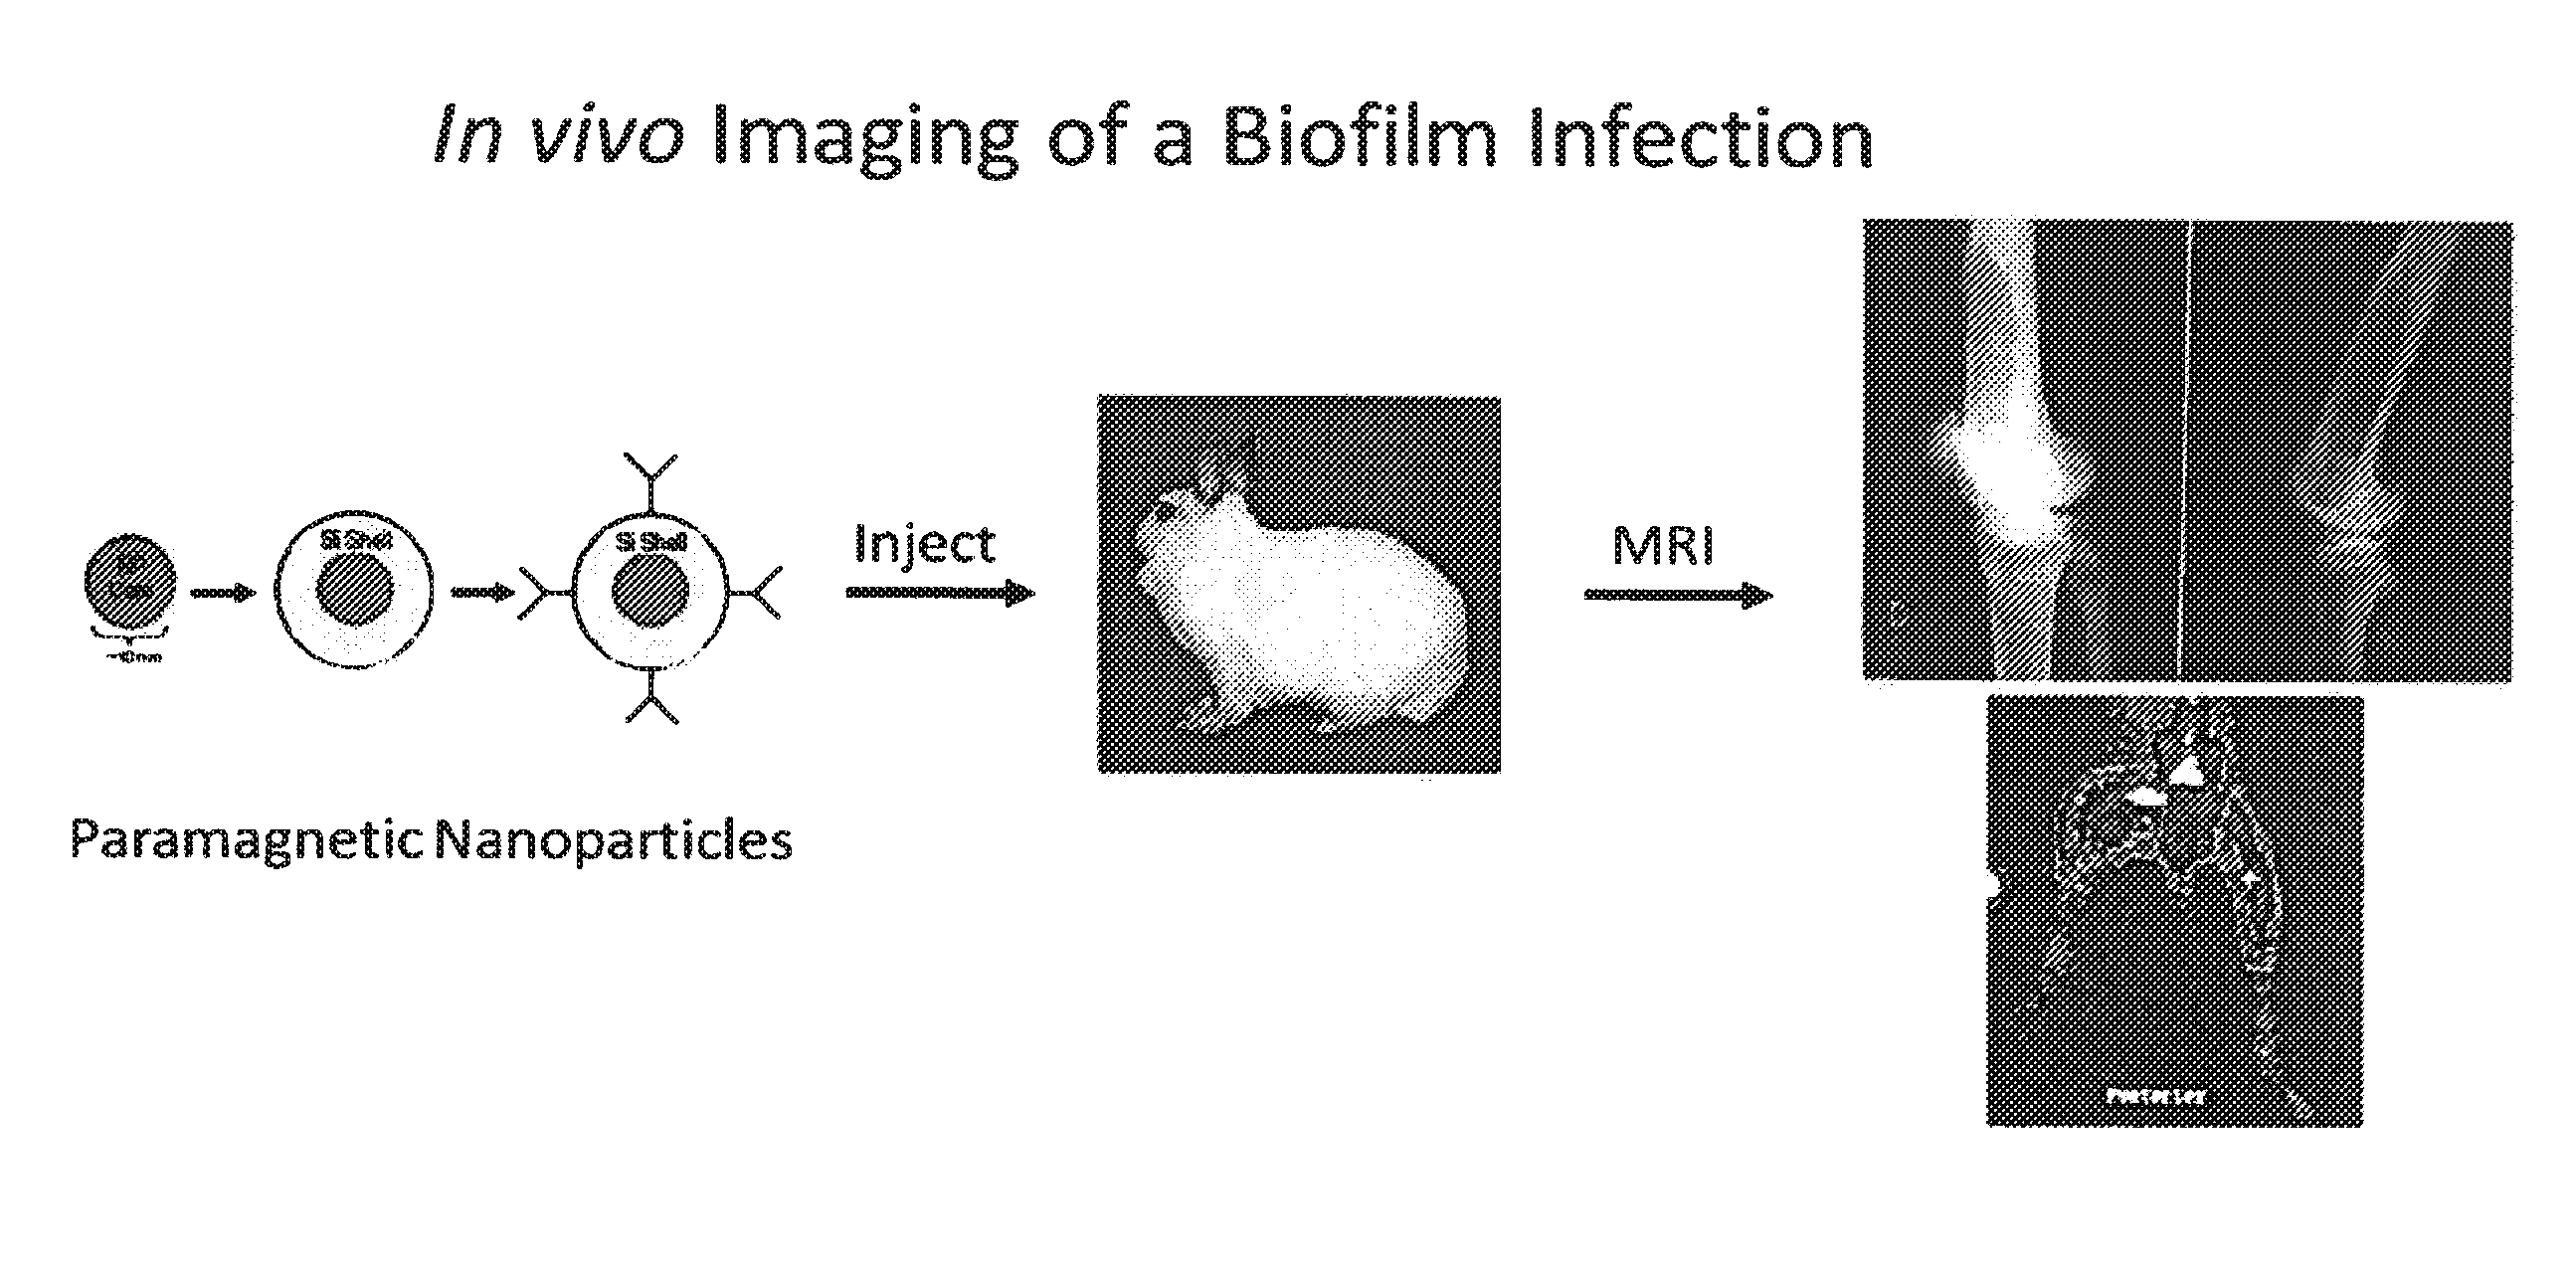 In vivo biofilm infection diagnosis and treatment